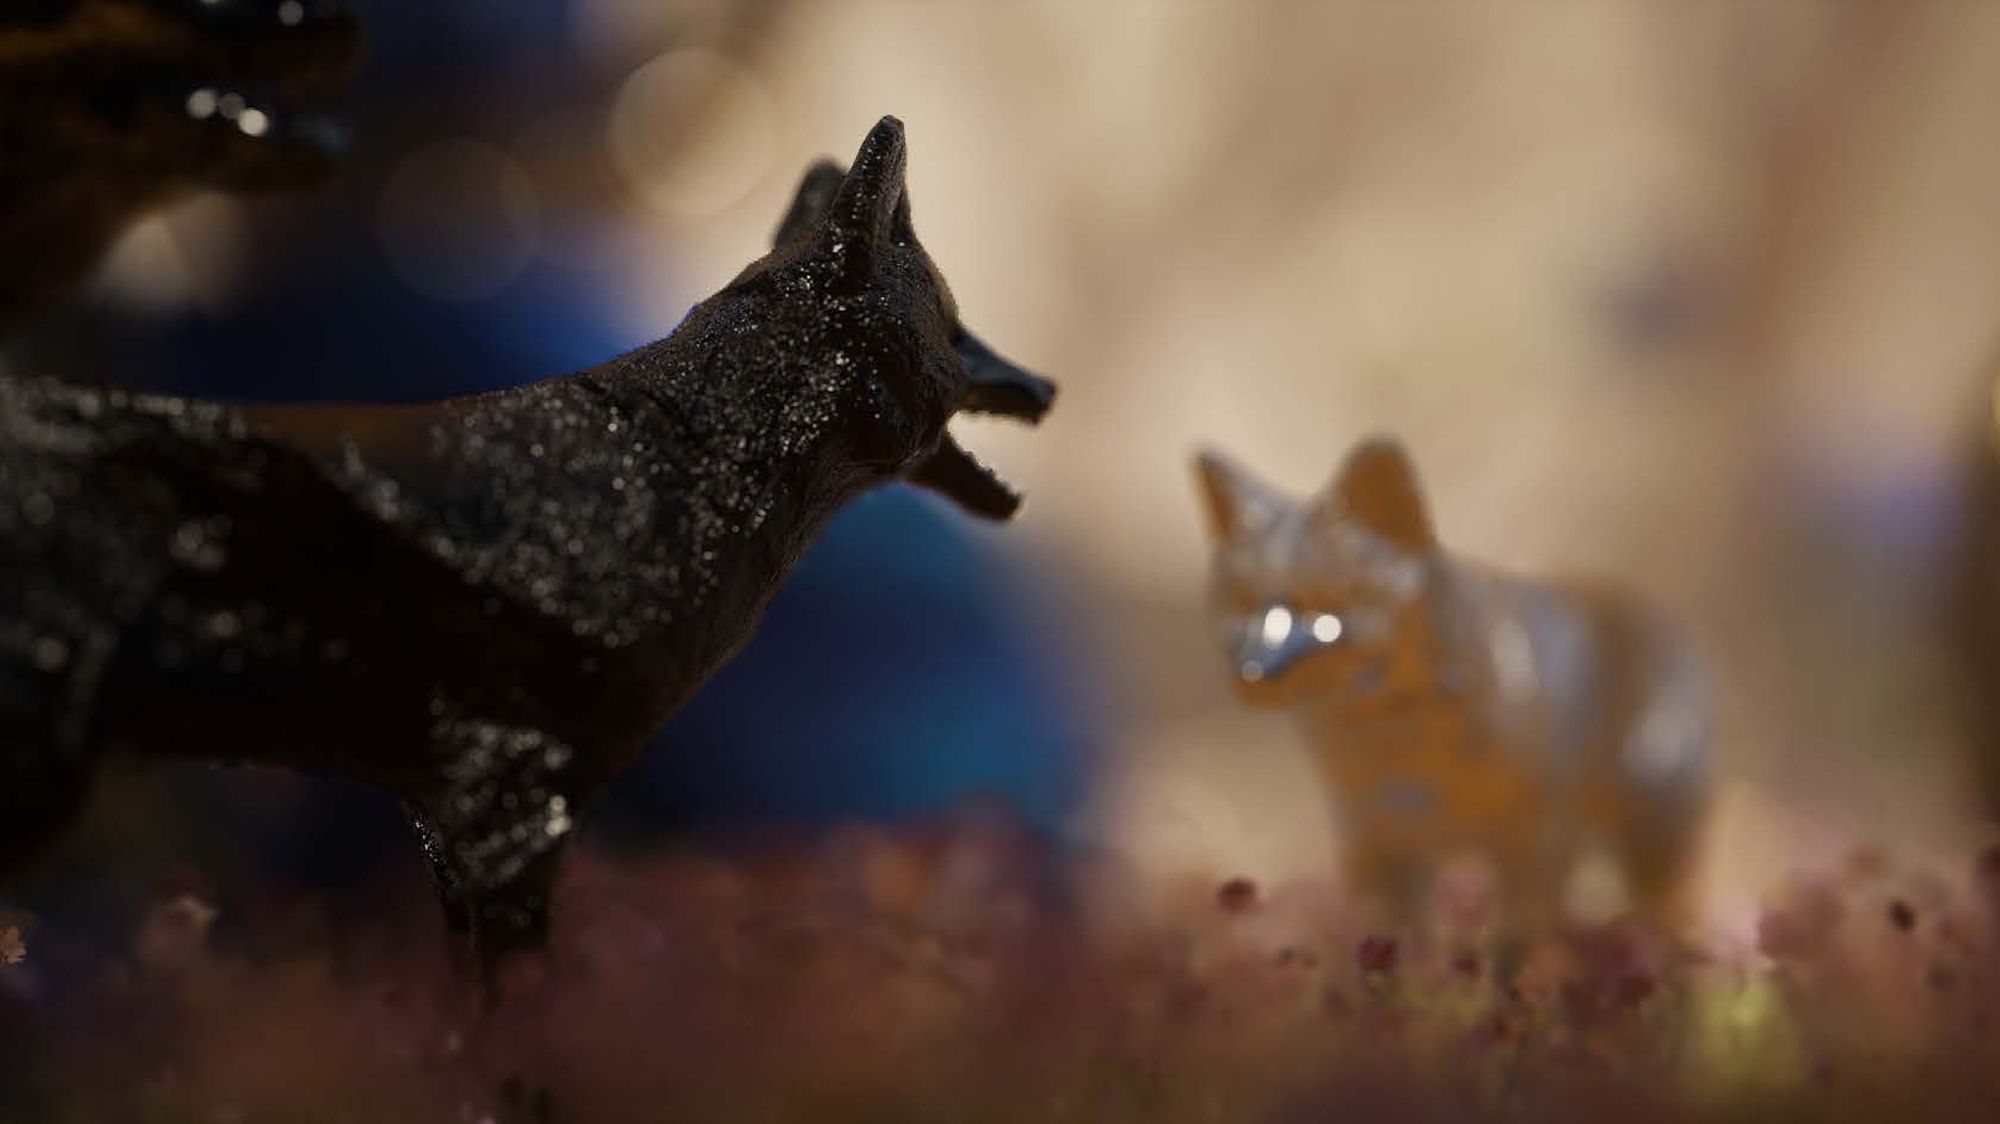 Two animated wolves with bright eyes, one looking directly at us. A still picture by Elfed Samuel